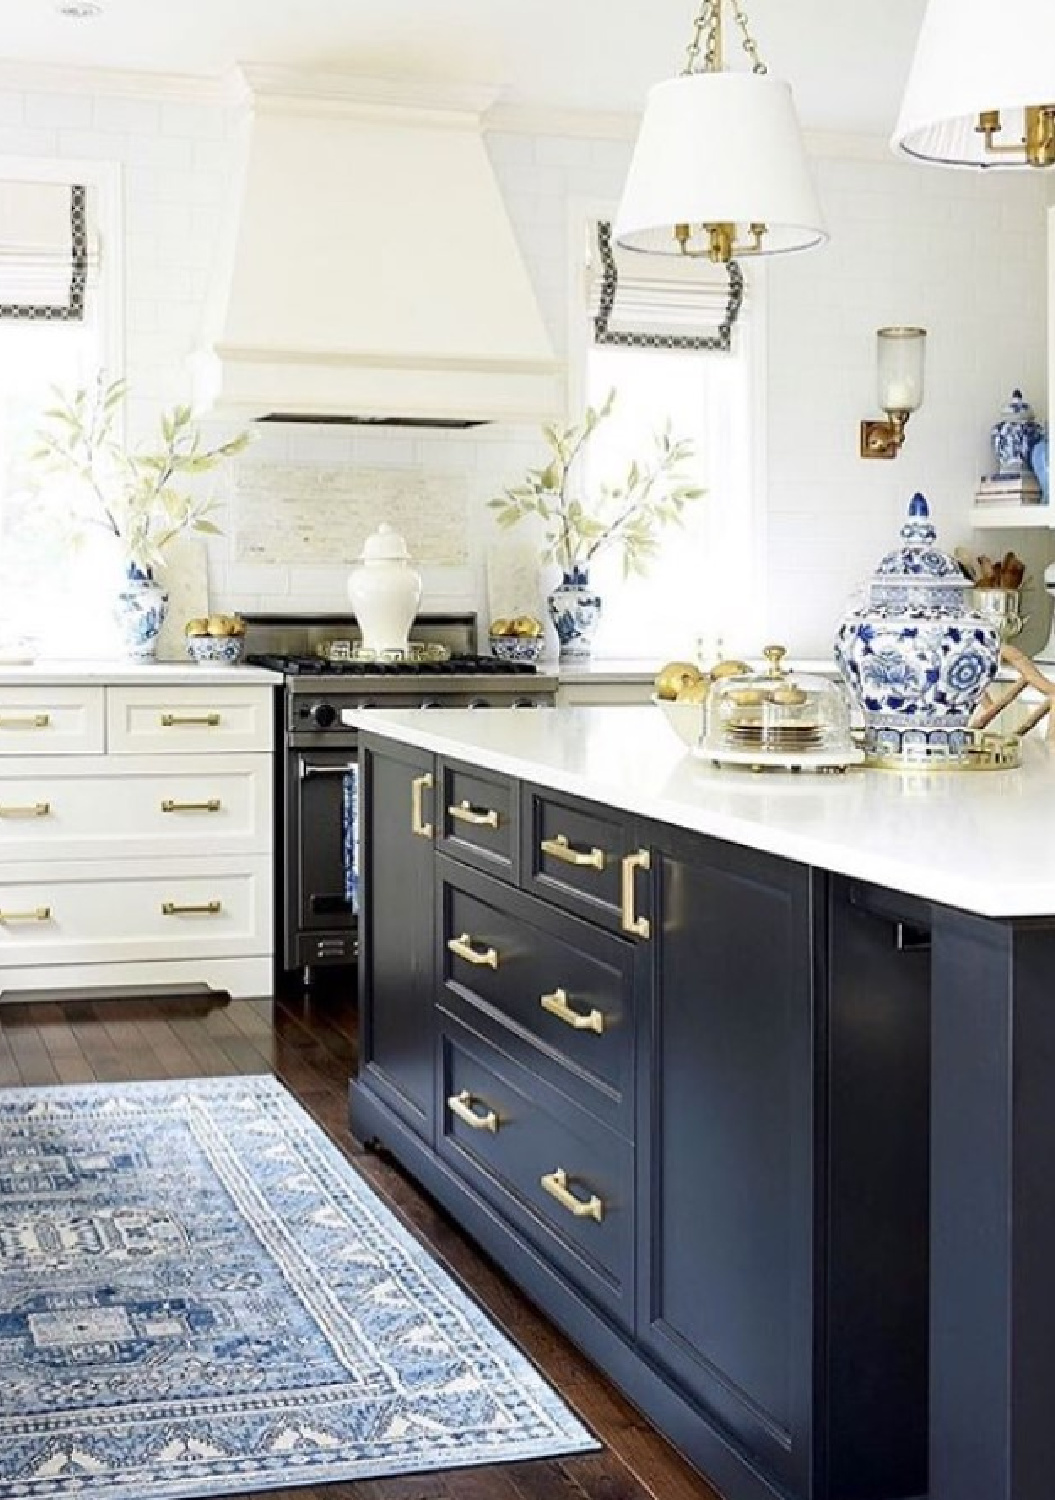 Classic, Shaker style kitchen with navy blue island, blue area rug, blue porcelain accents and traditional style - Citrine Living. #blueandwhitekitchen